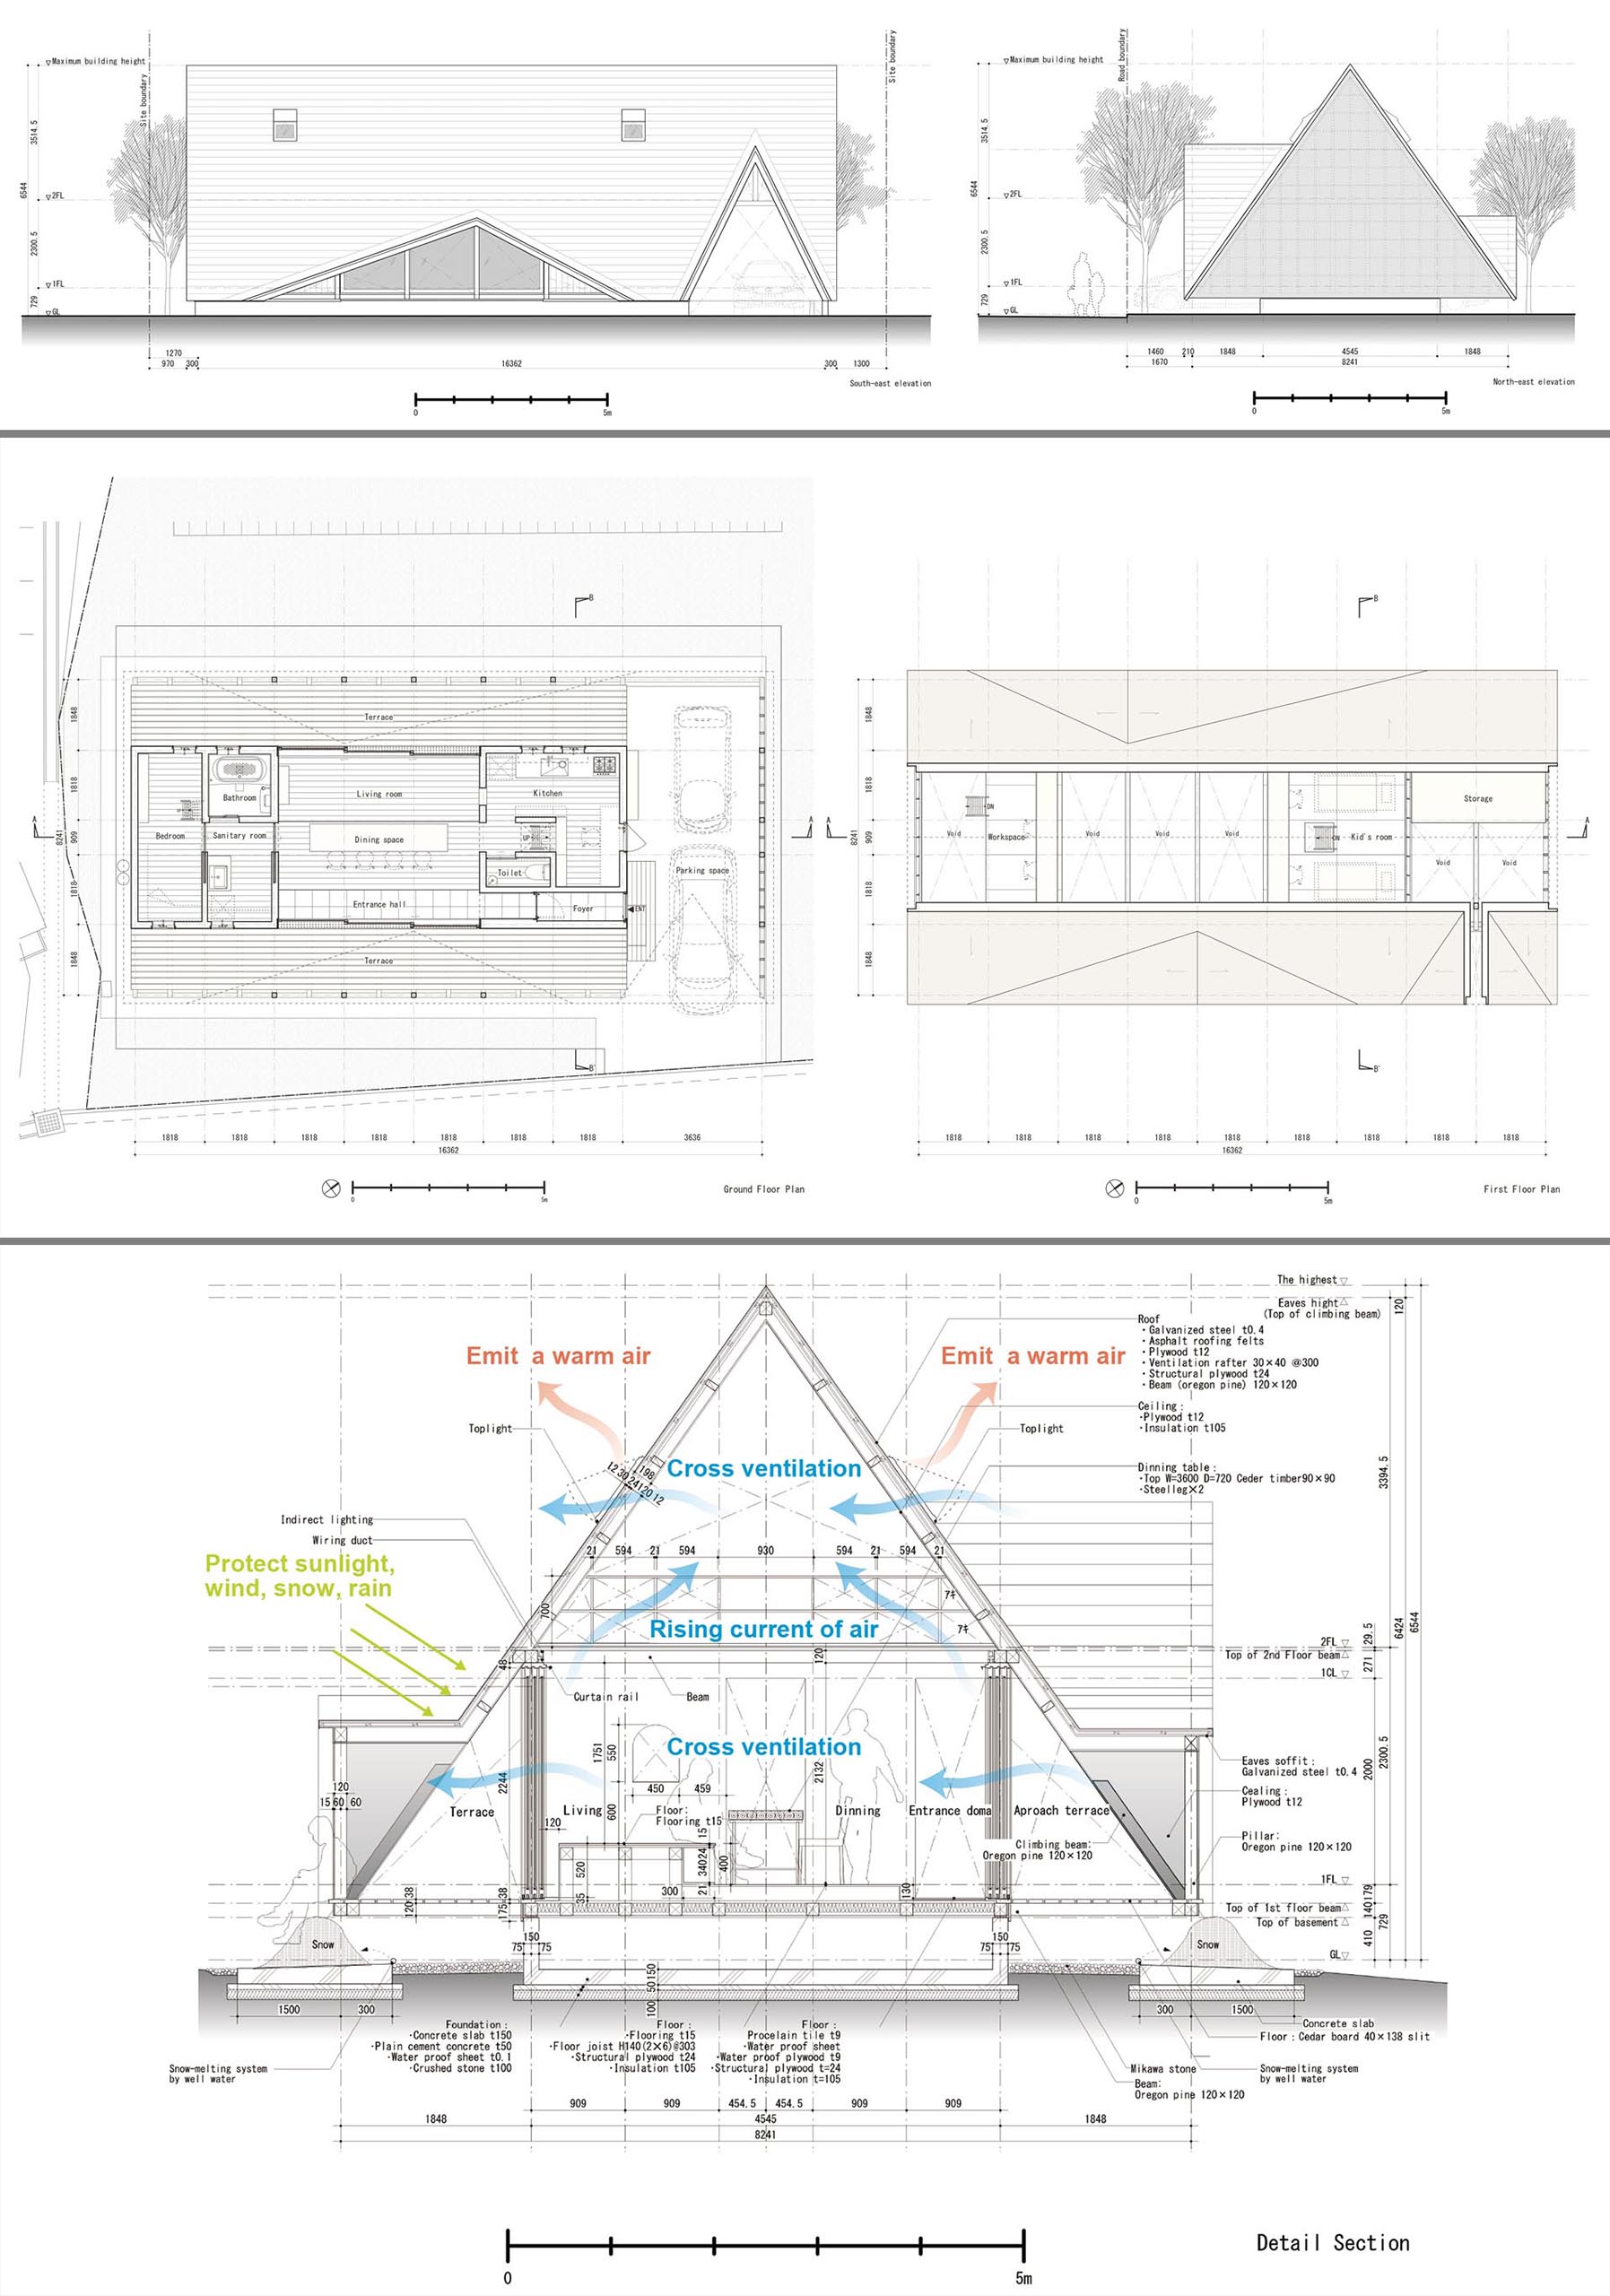 The floor plans and diagram of an A-frame home.